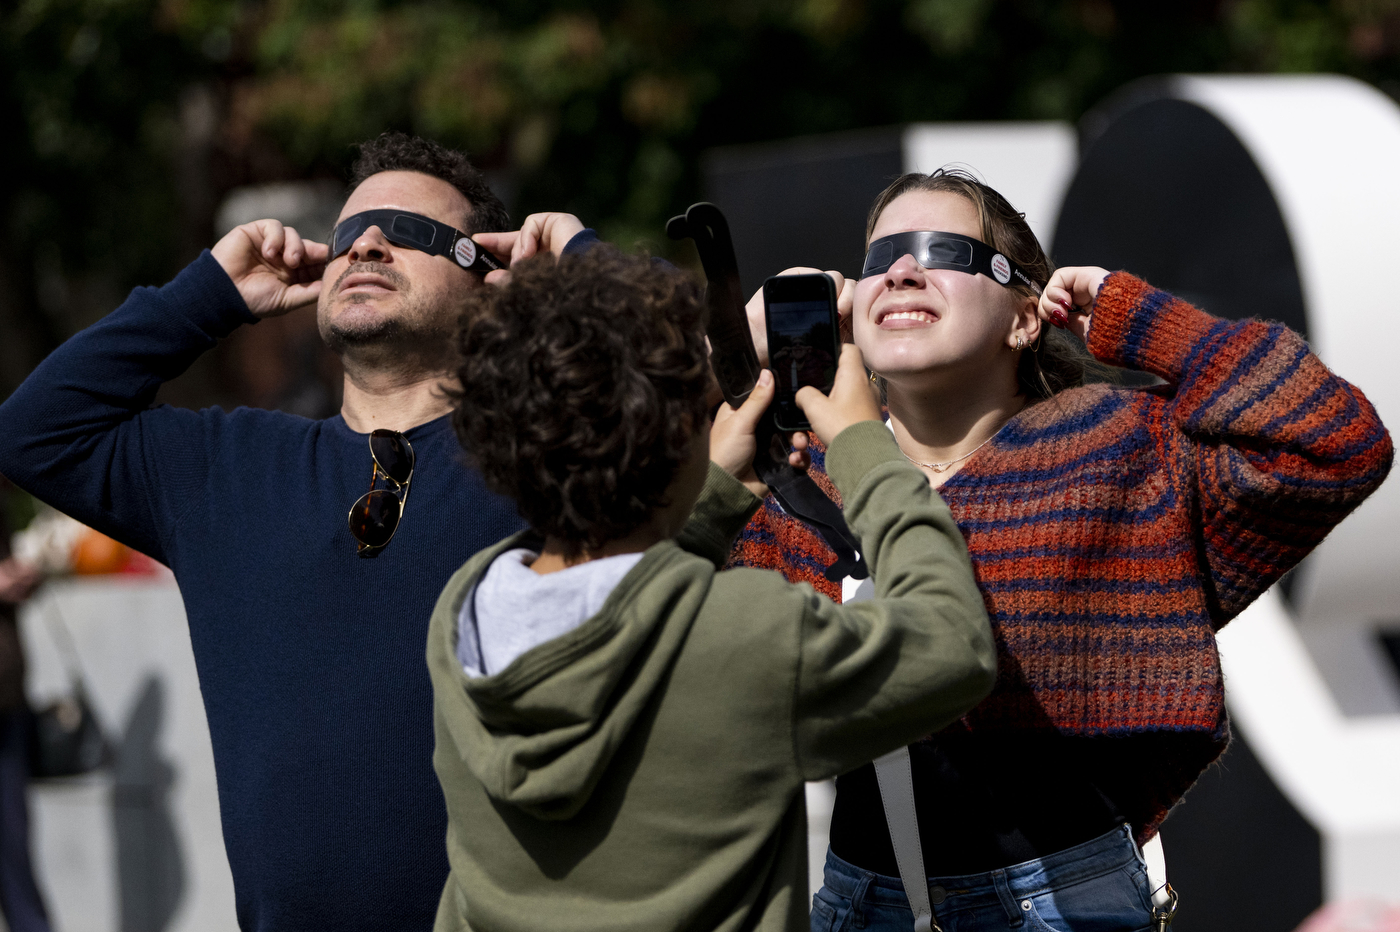 People with solar eclipse sunglasses at at Family and Friends weekend.